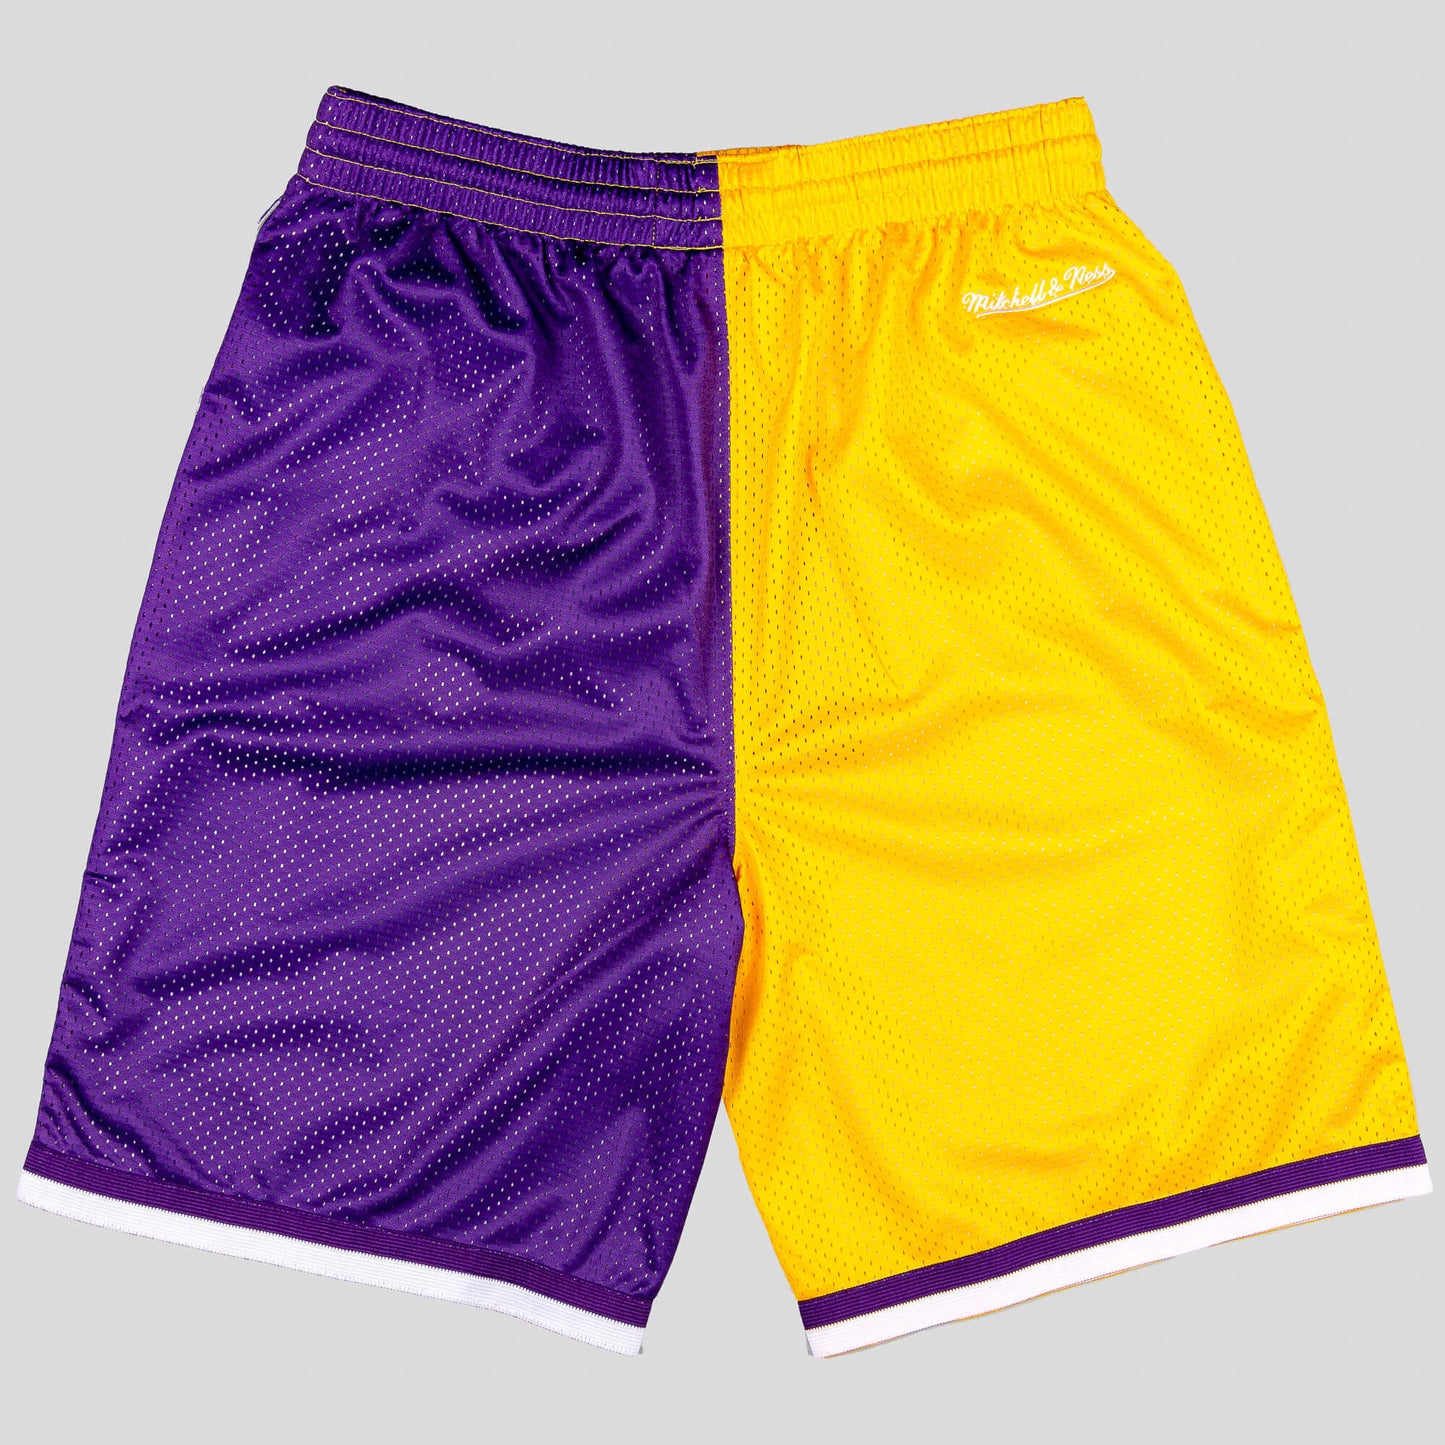 Mitchell And Ness Nba Big Face Shorts 5.0 - 8-20Y Los Angeles Lakers Yellow/Purple/White